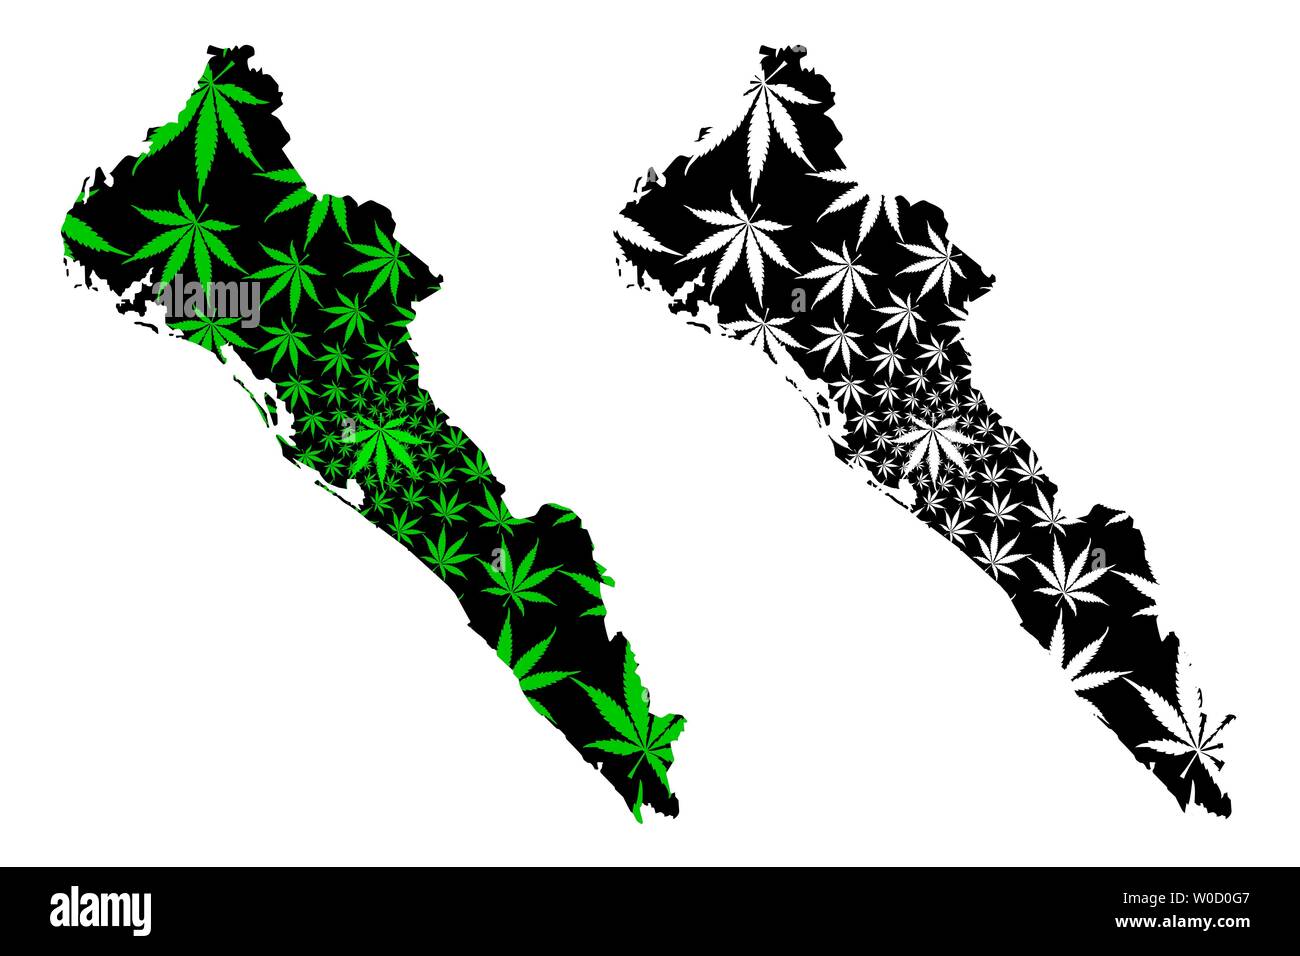 Sinaloa (United Mexican States, Mexico, federal republic) map is designed cannabis leaf green and black, Free and Sovereign State of Sinaloa map made Stock Vector